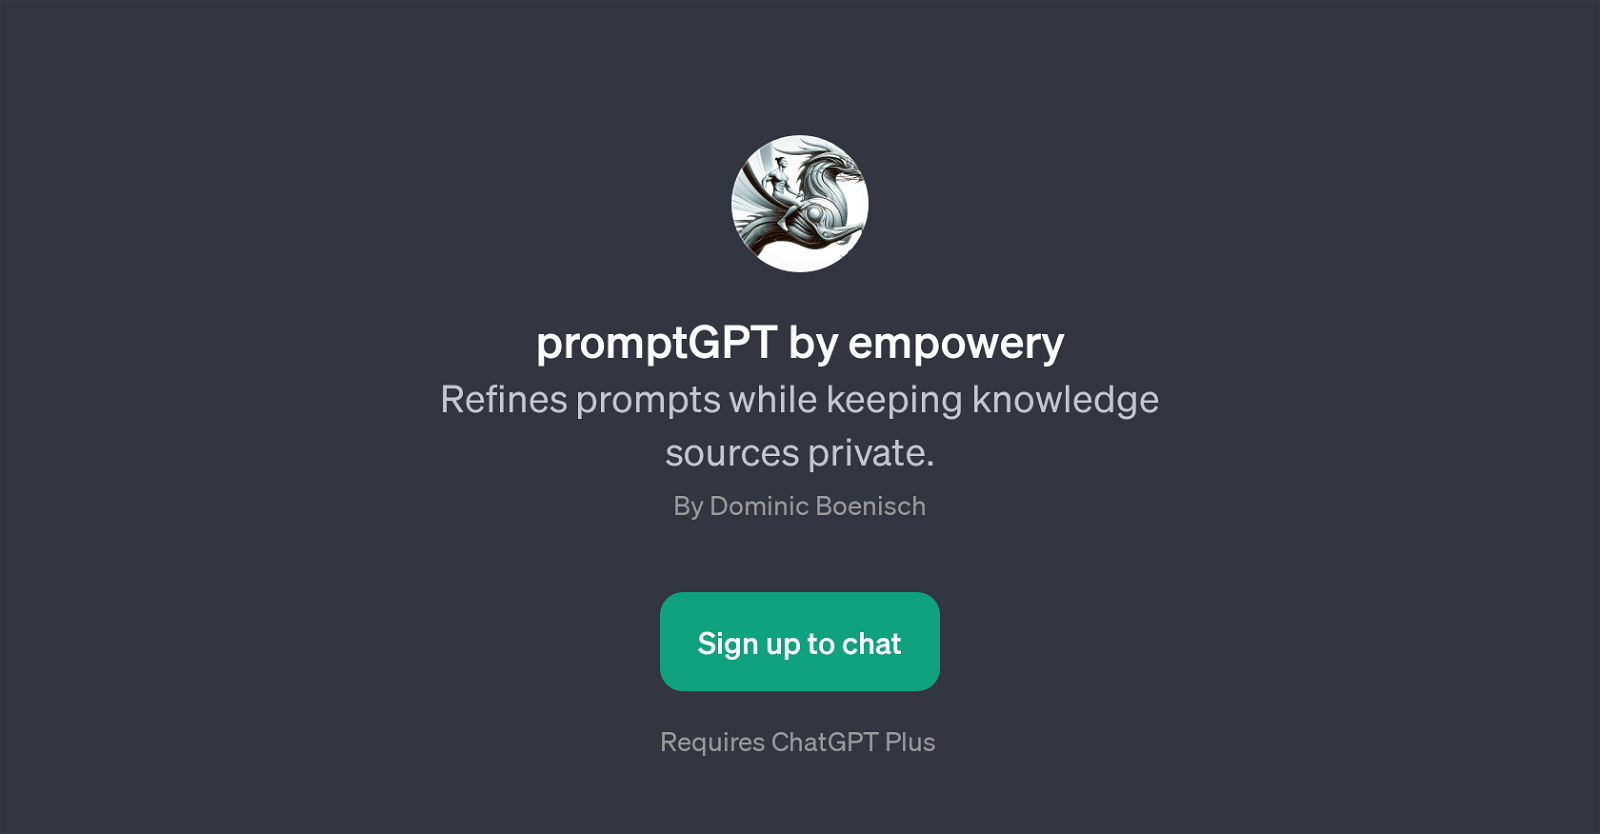 promptGPT by empowery website